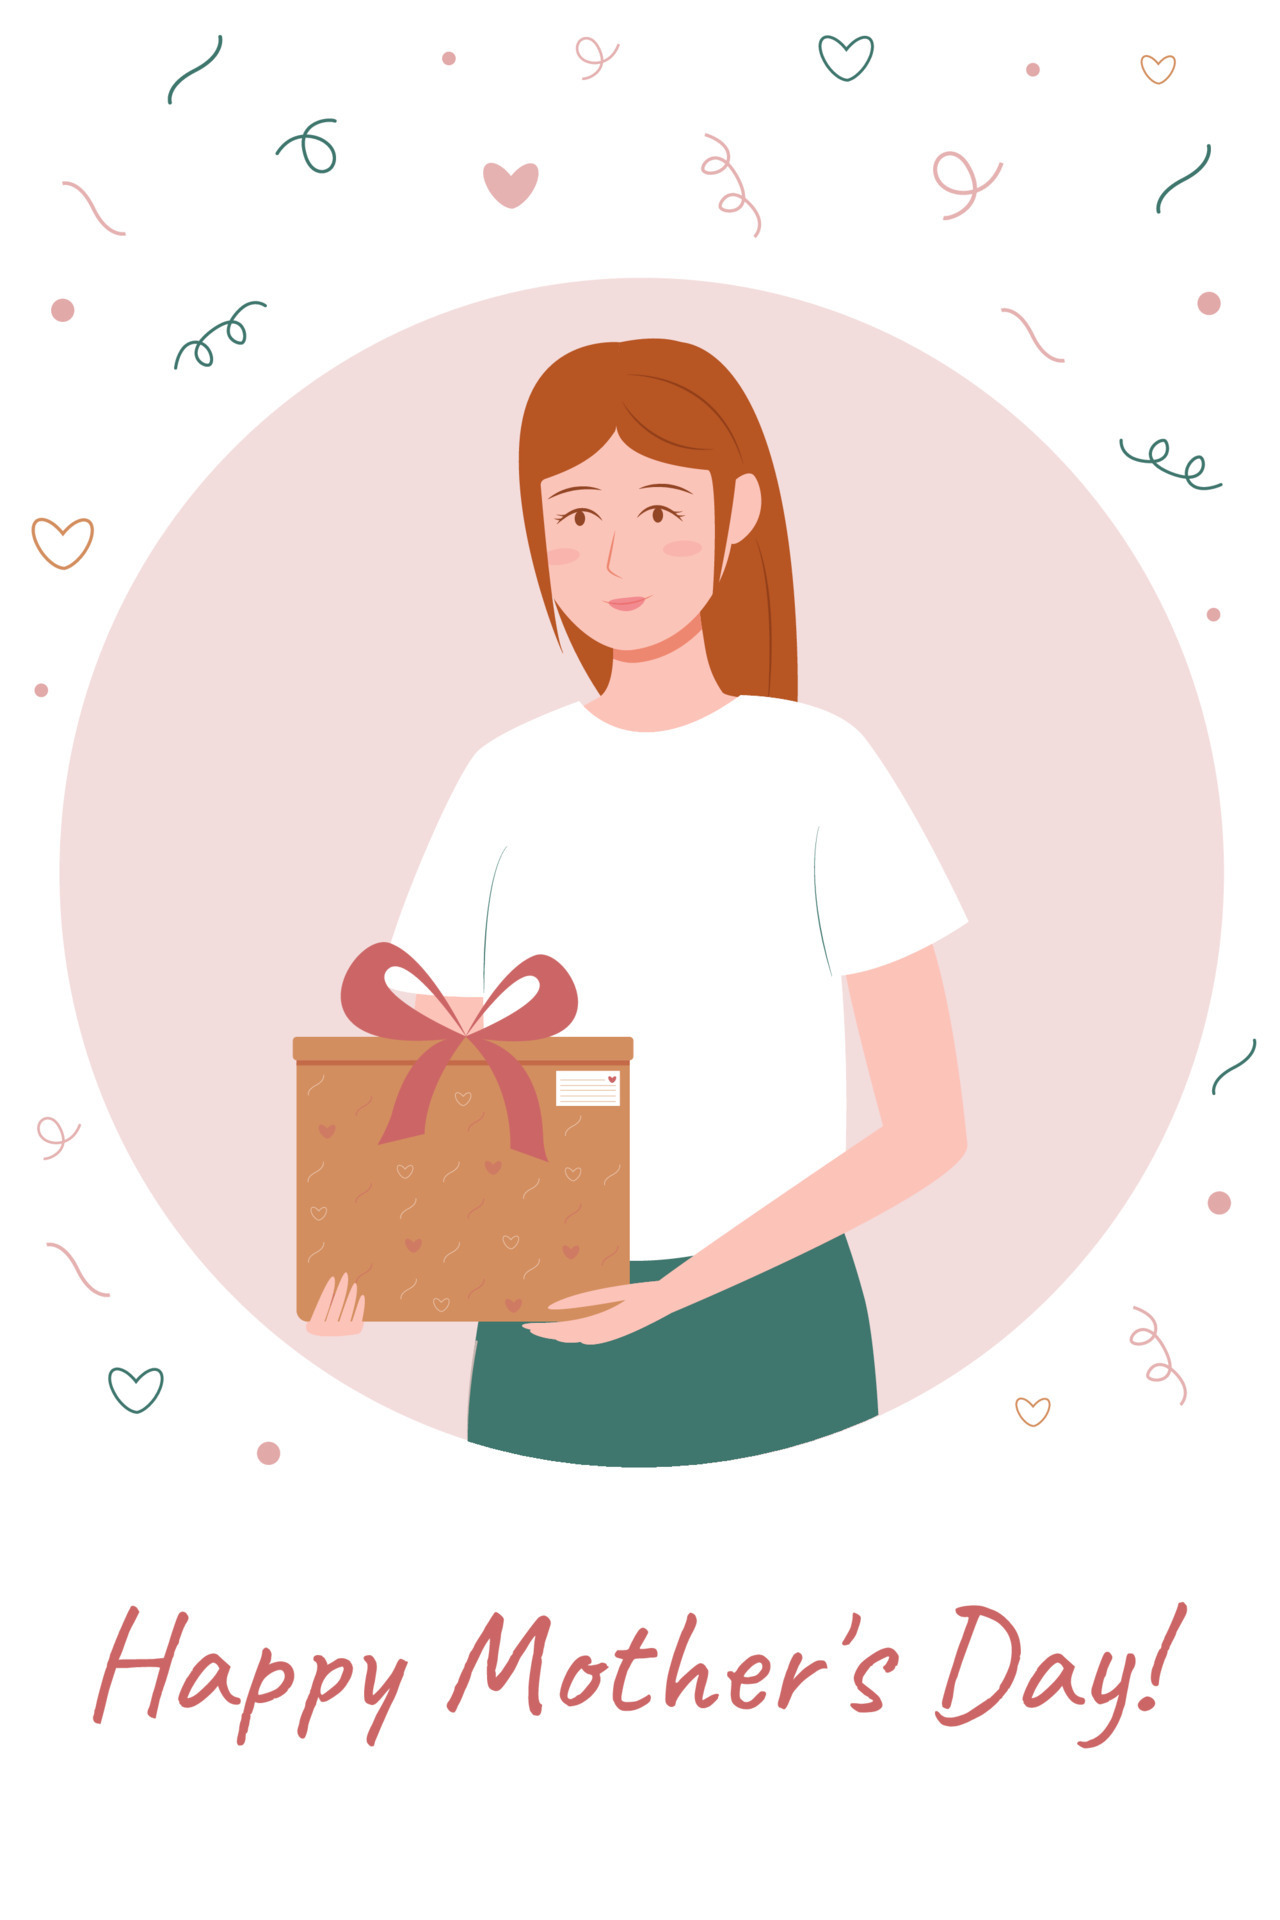 Free Vector  Mother's day gift card